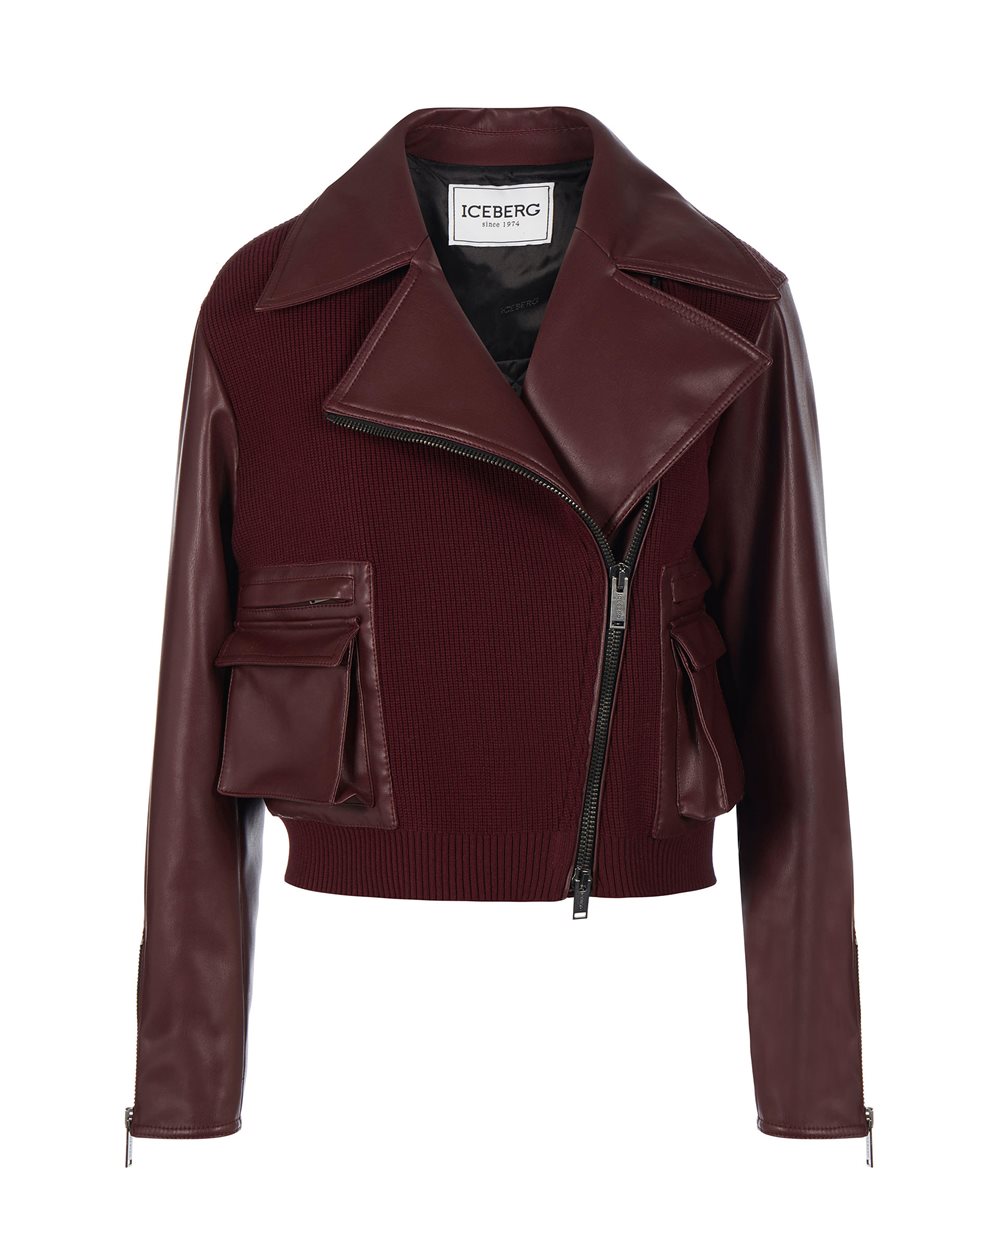 Biker jacket in wool and eco-leather - Fashion Show Woman | Iceberg - Official Website